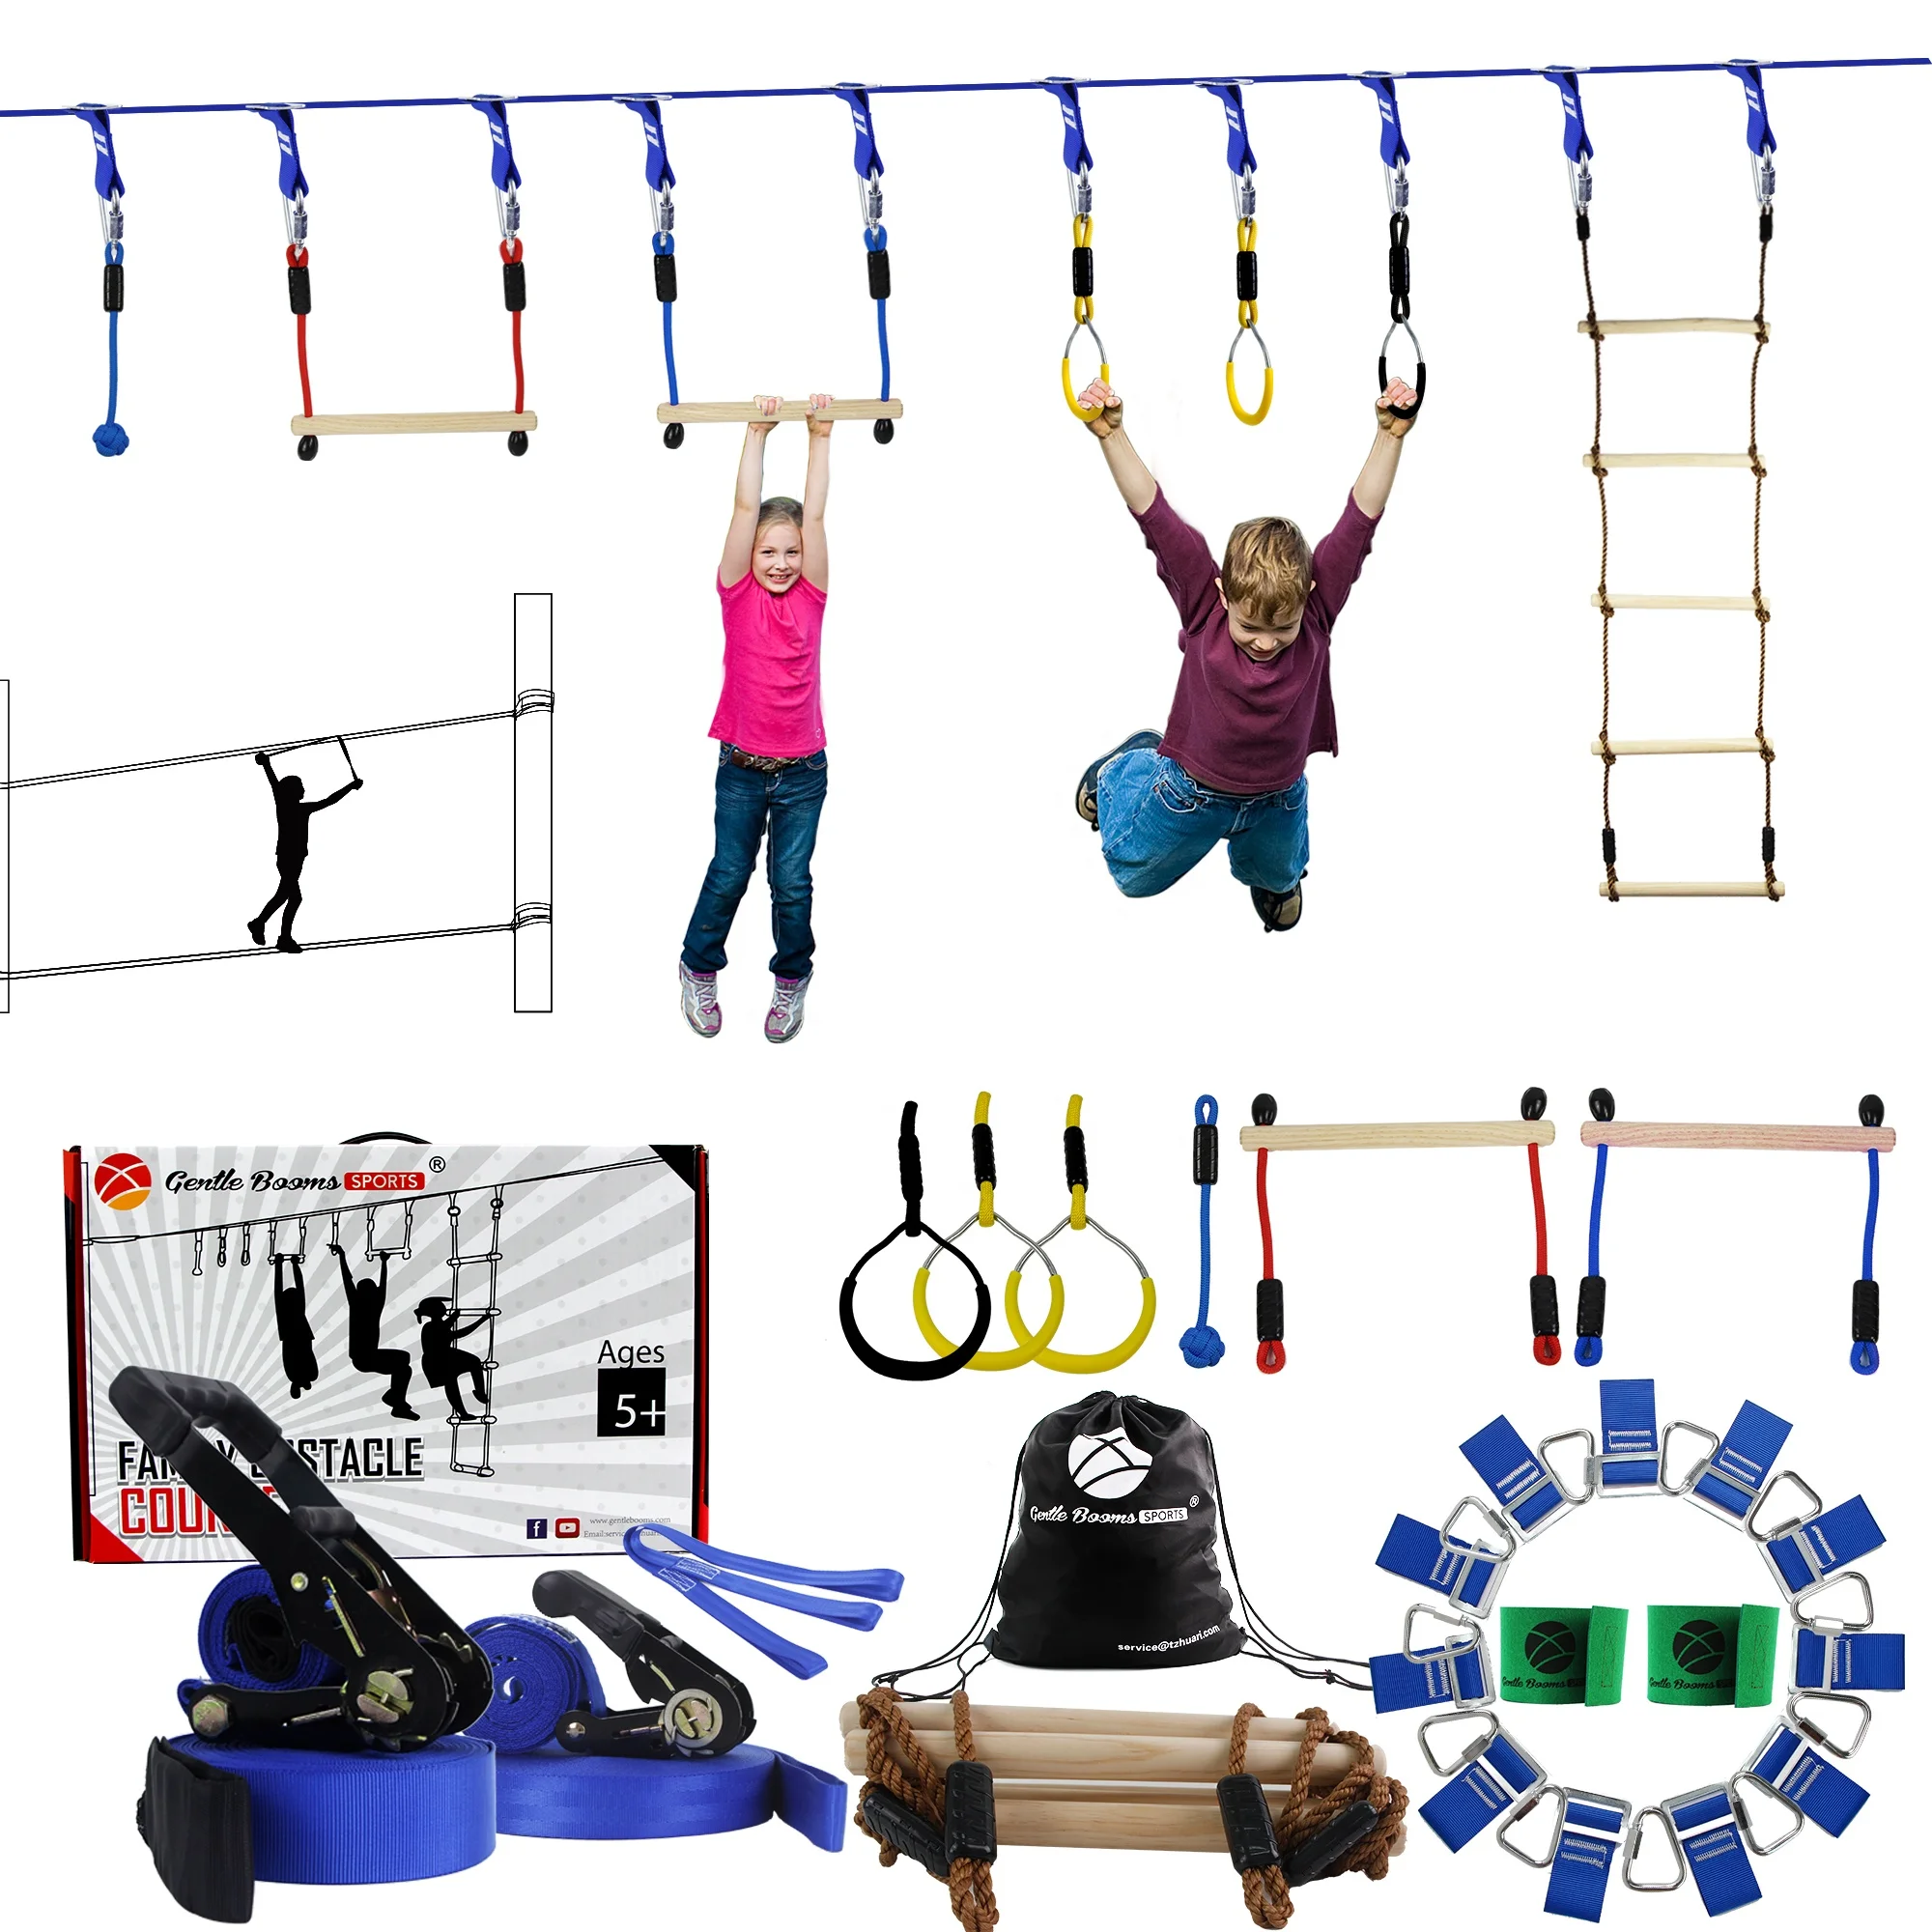 

Gentle Booms Sports Outdoor Ninja Line Ninja Warrior Family Obstacle Course of Monkey Bar,Rings,Ladder,Knot, Black,purple,blue or customized